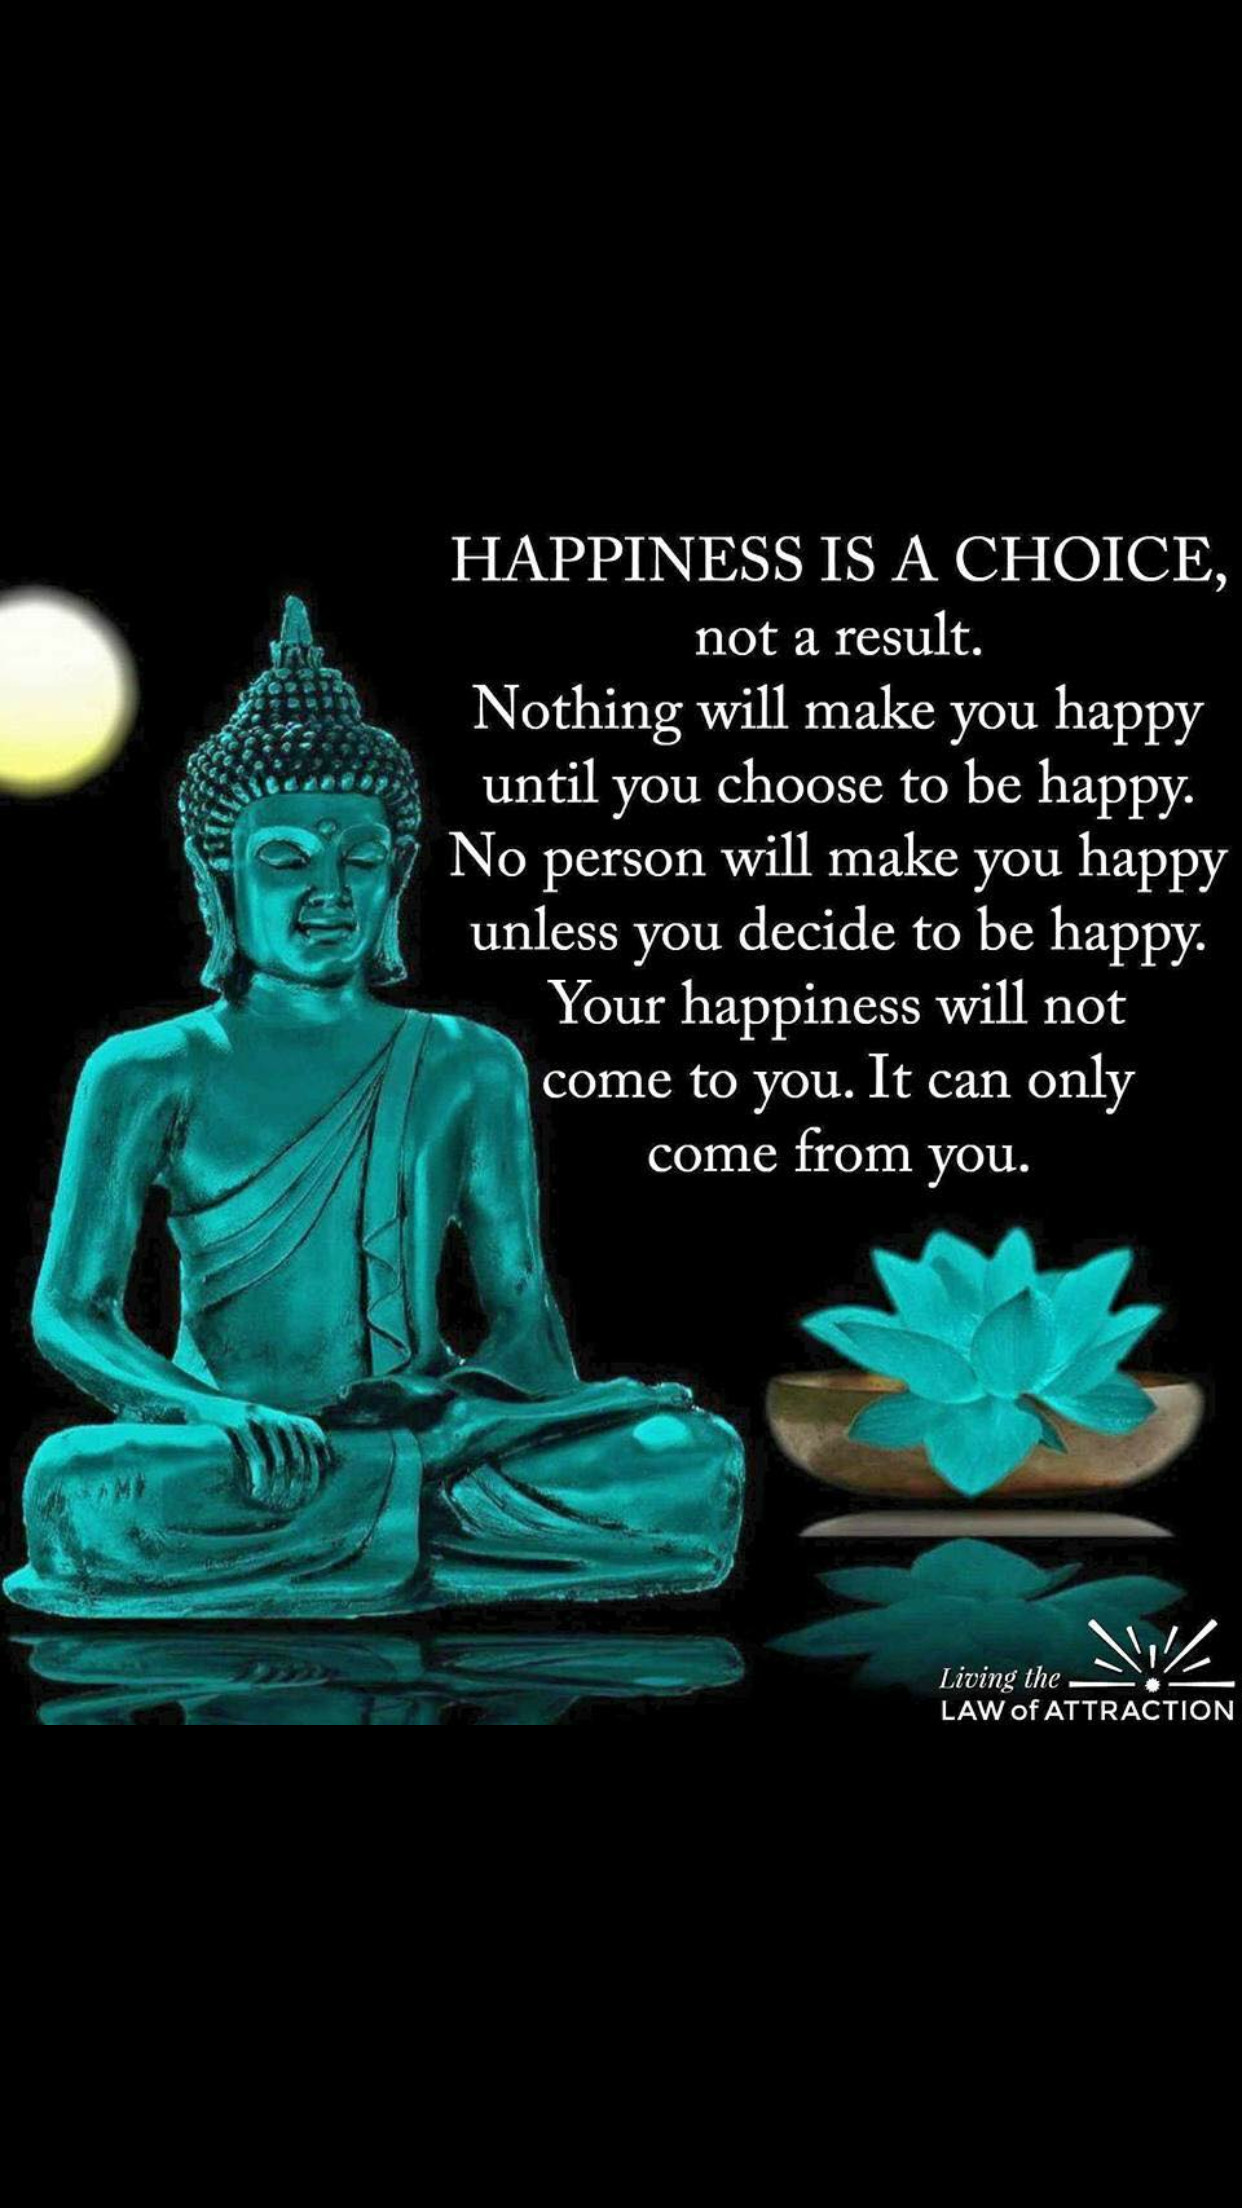 Buddha Motivational Quotes
 How beautifully and powerfully said Qoutes